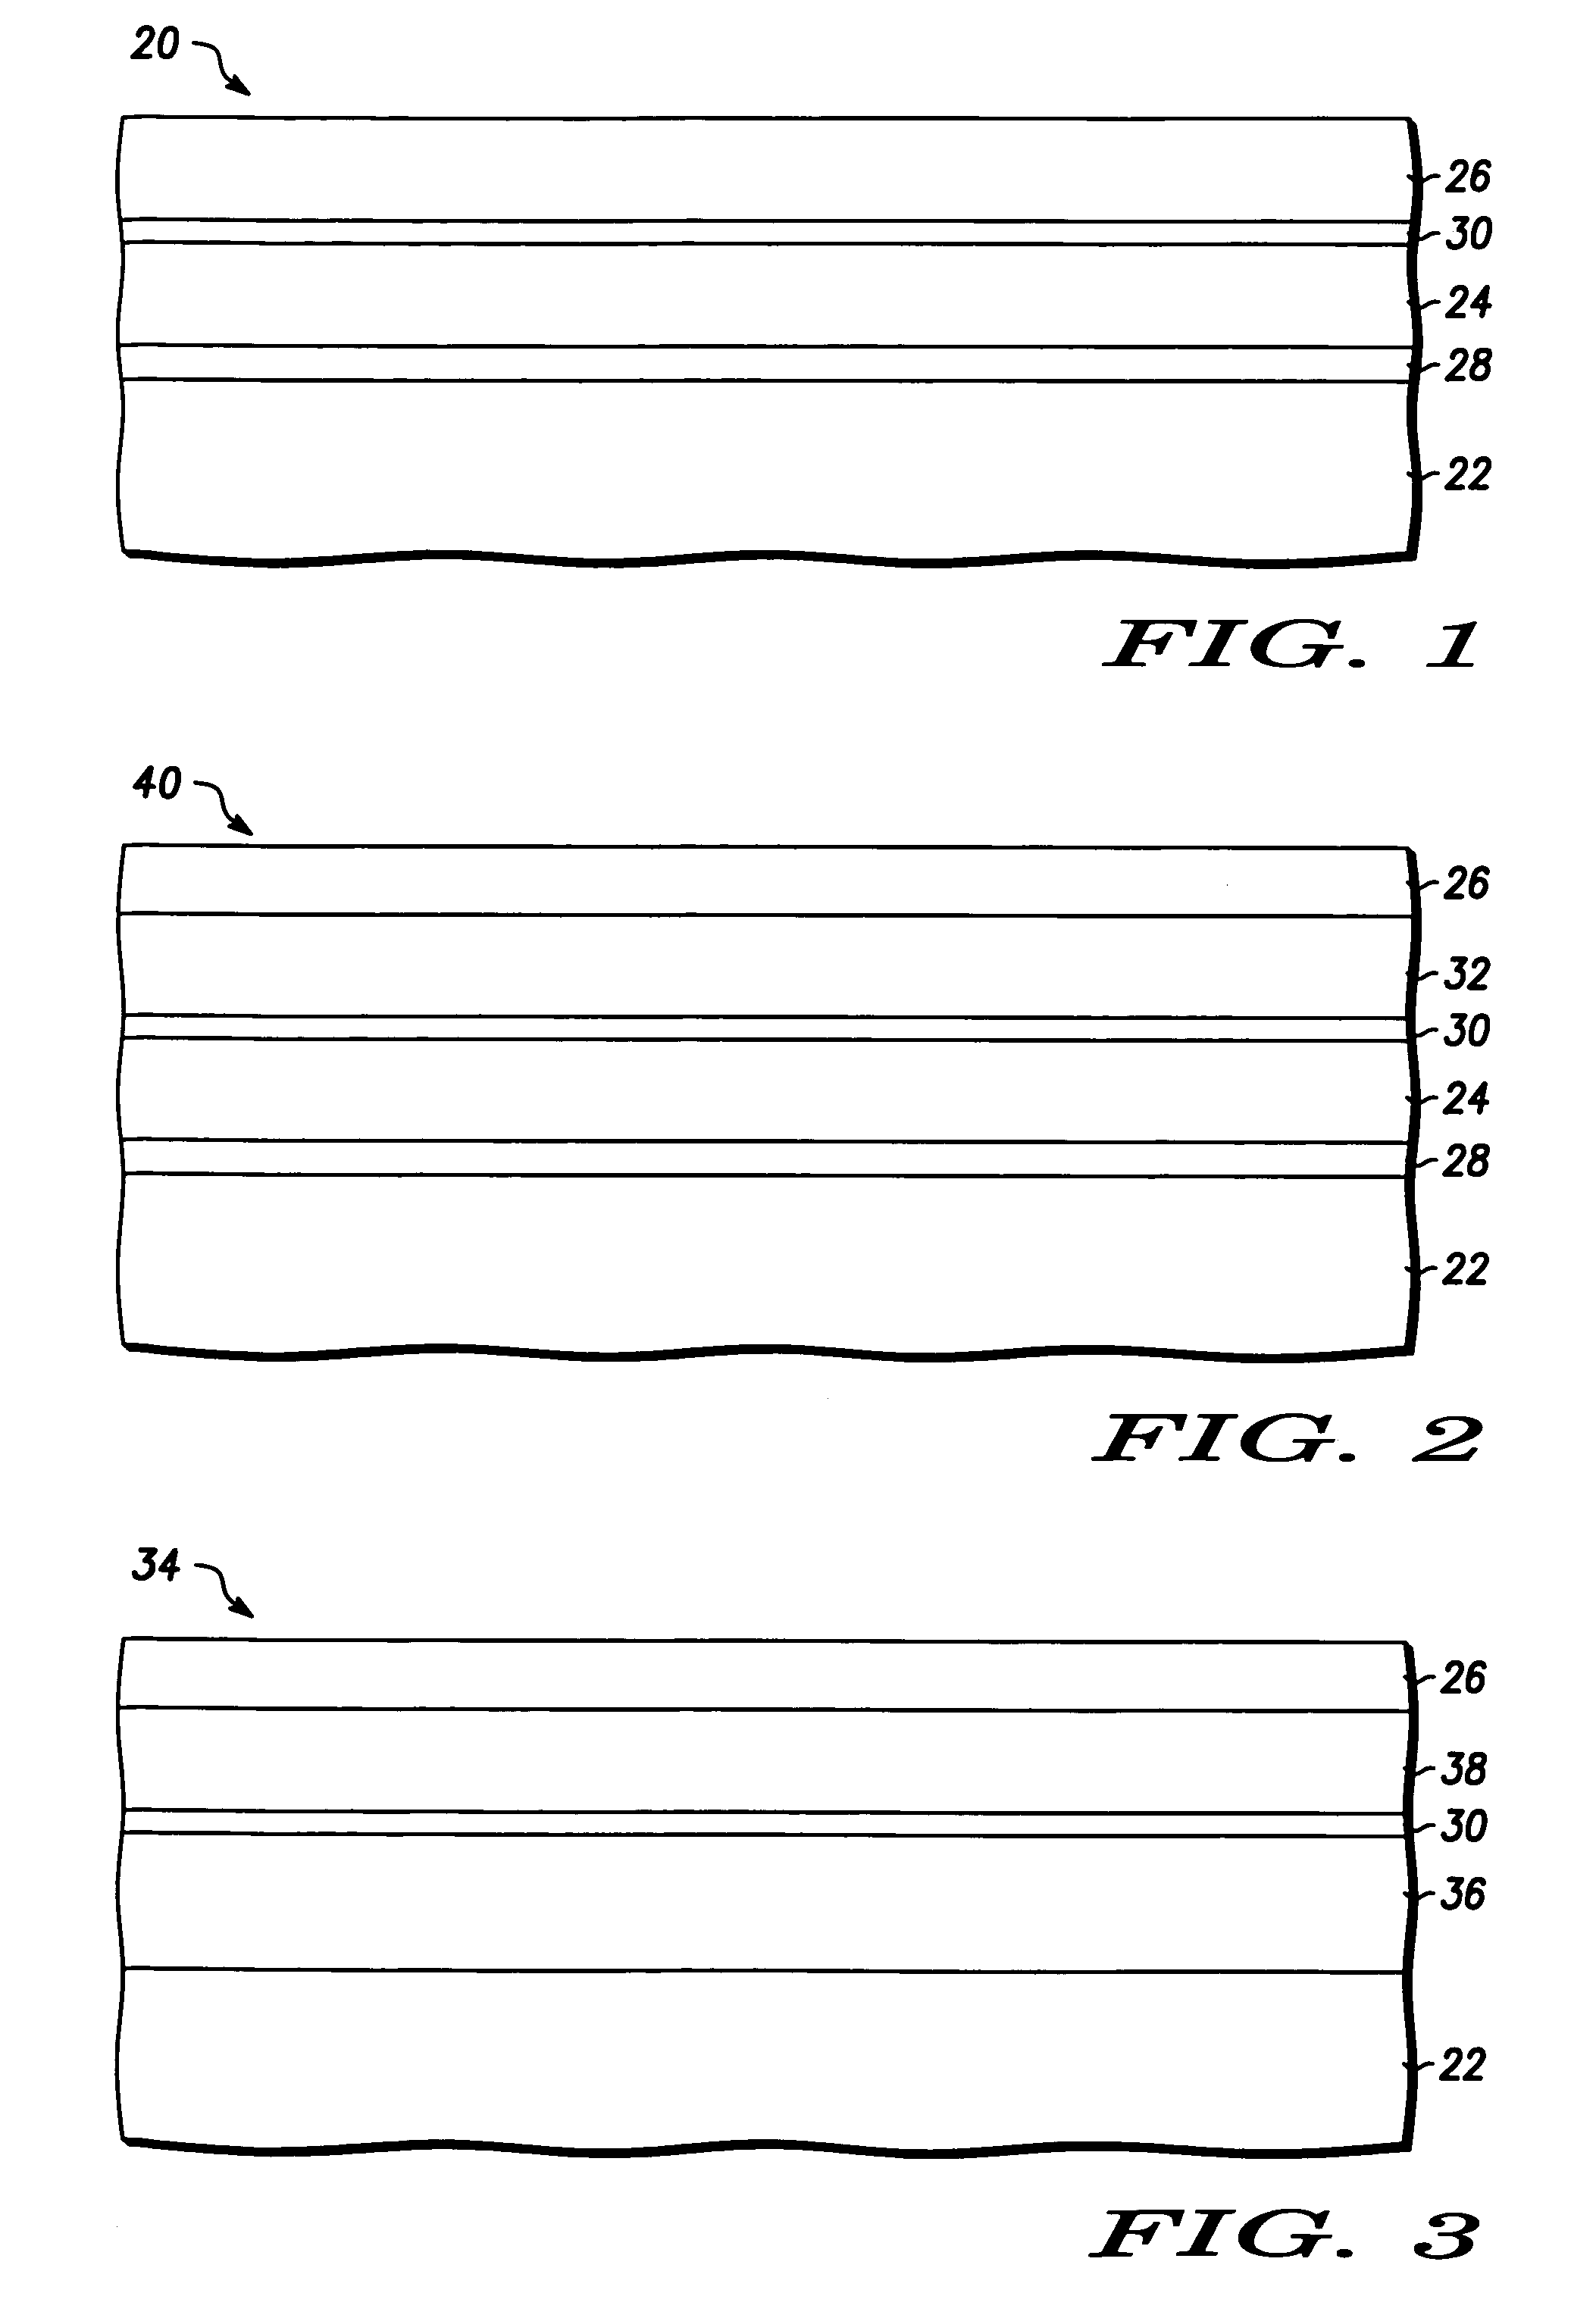 Structure and method for fabricating semiconductor structures and devices for detecting an object